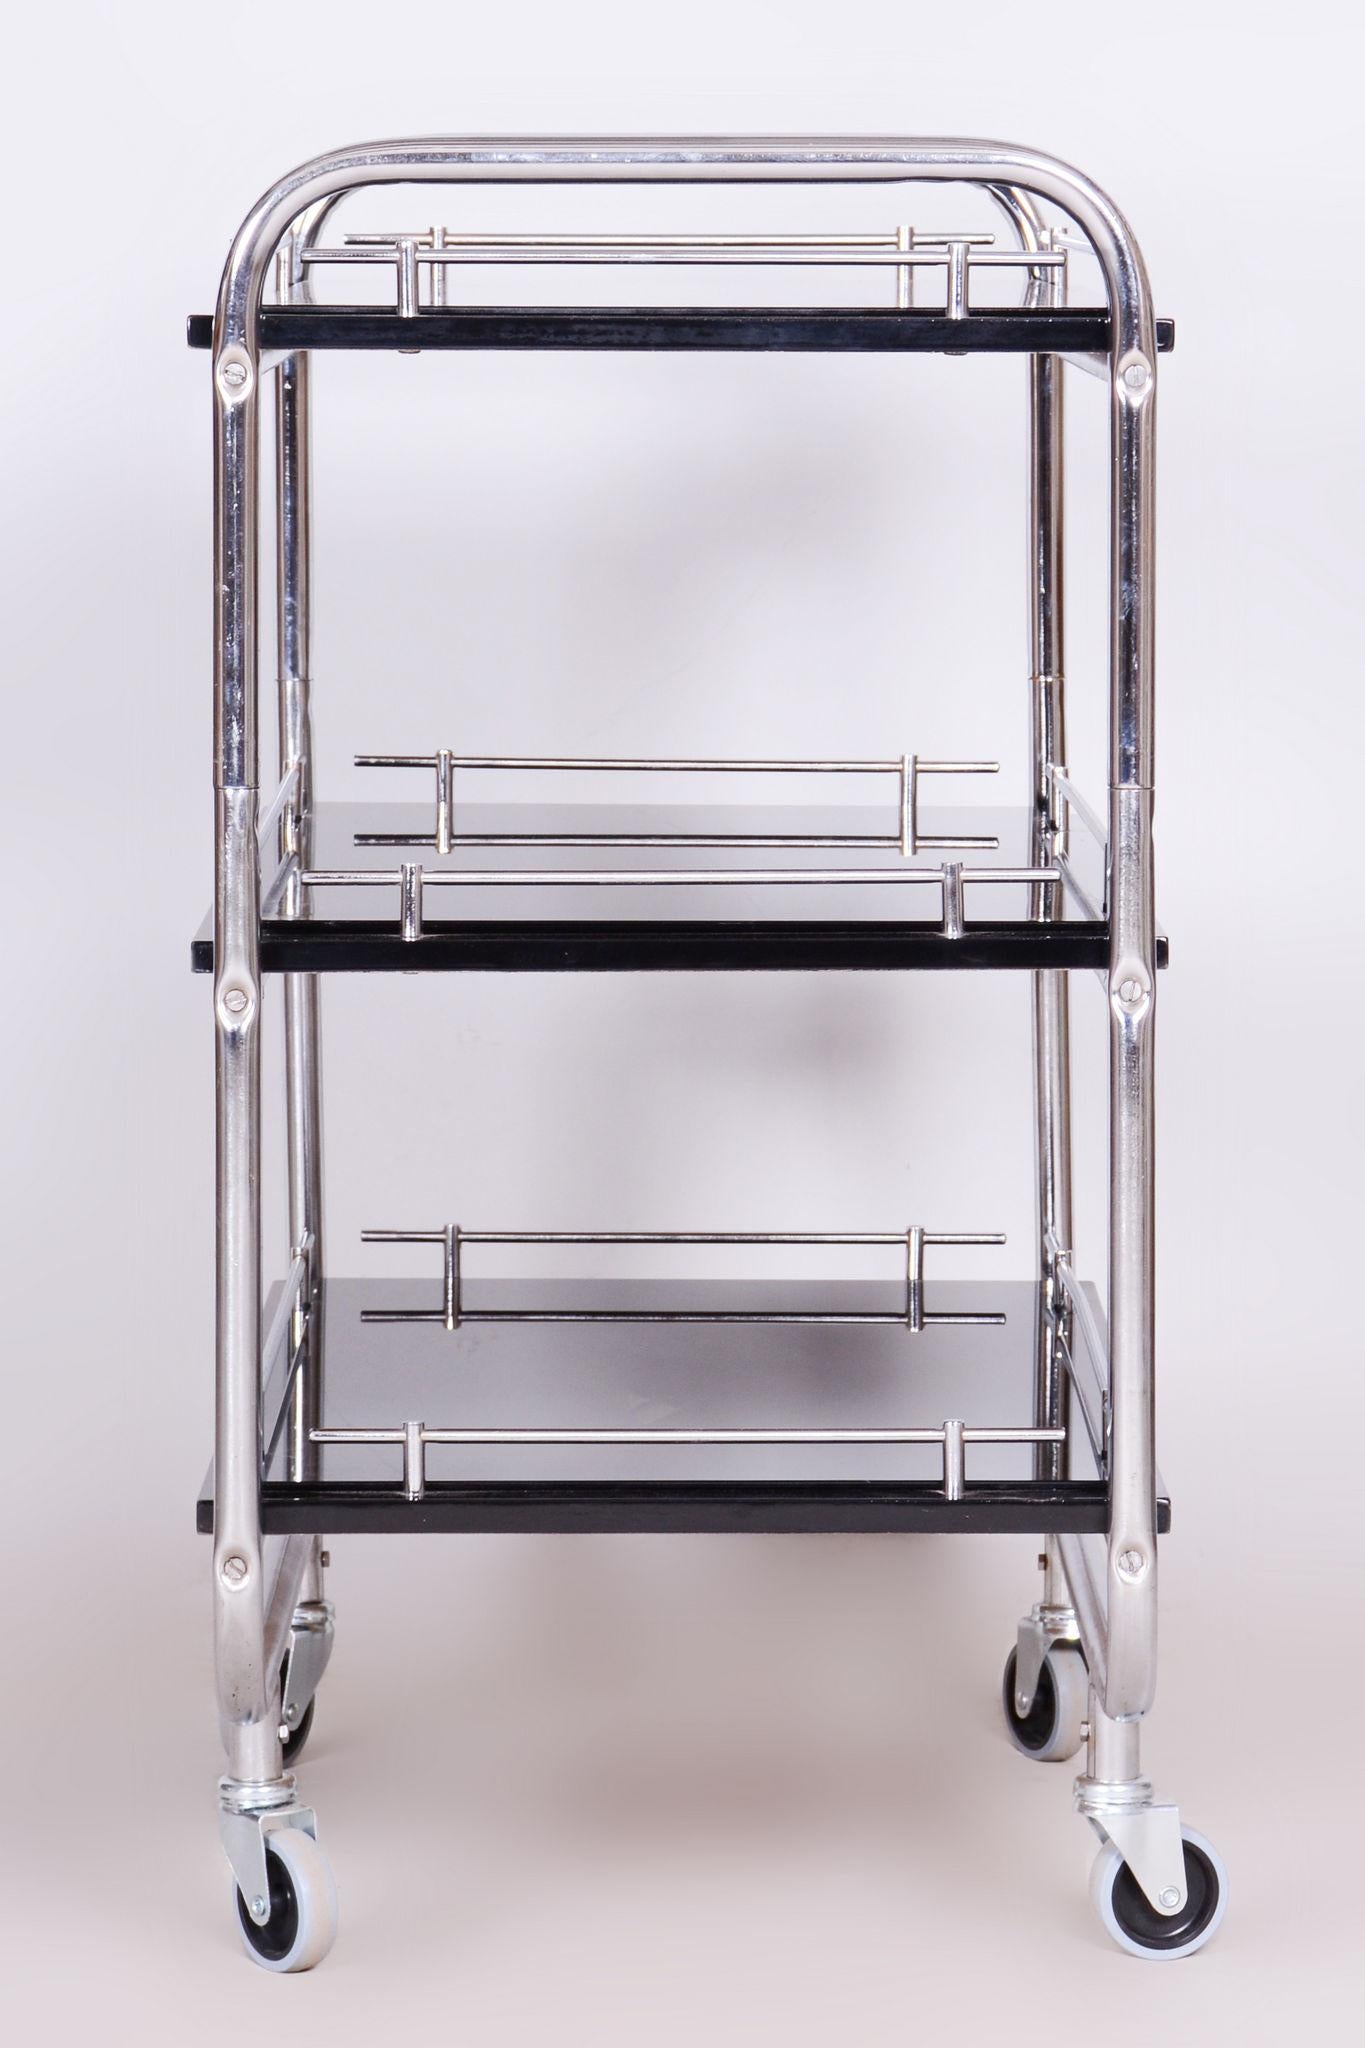 Restored Bauhaus Trolley Made By Kovona.

Maker: Kovona
Material: Chrome-plated Steel, Varnished Wood, Glass
Source: Czechia (Czechoslovakia)
Period: 1930-1939

Newly painted shelves.
The chrome parts have been cleaned and professionally restored.